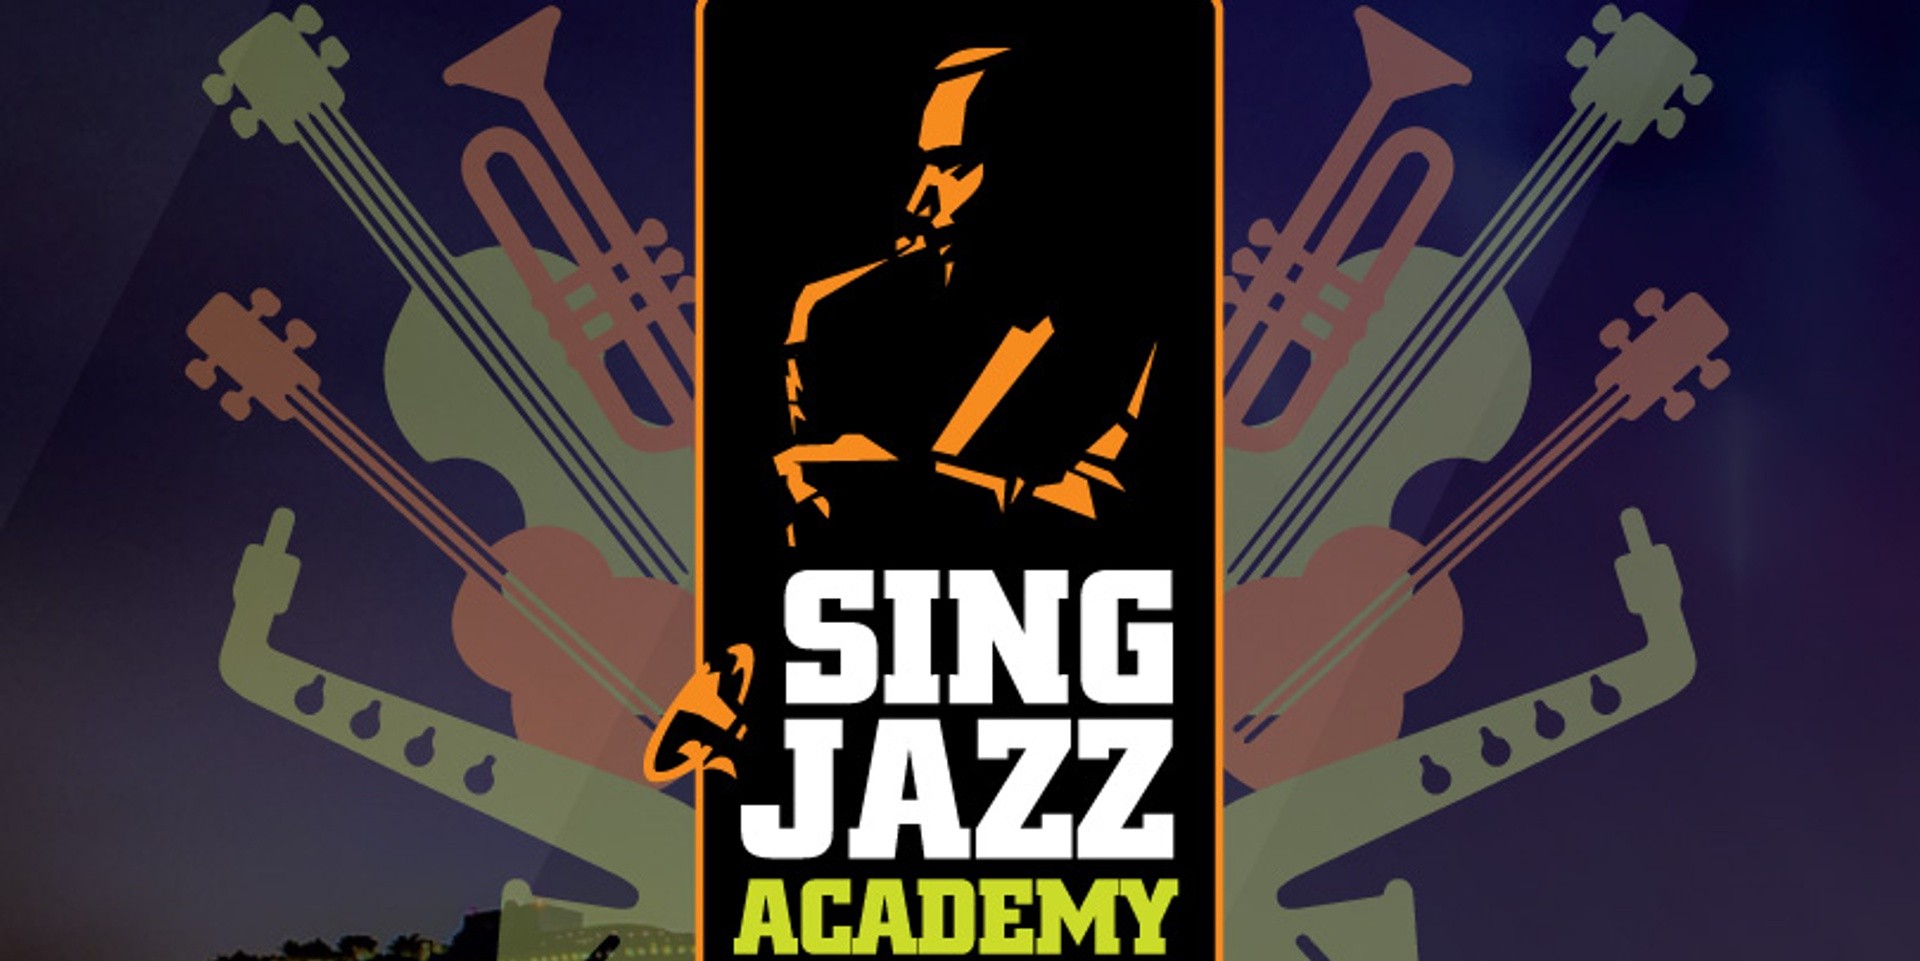 Calling all budding jazz musicians: the SingJazz Academy wants you!